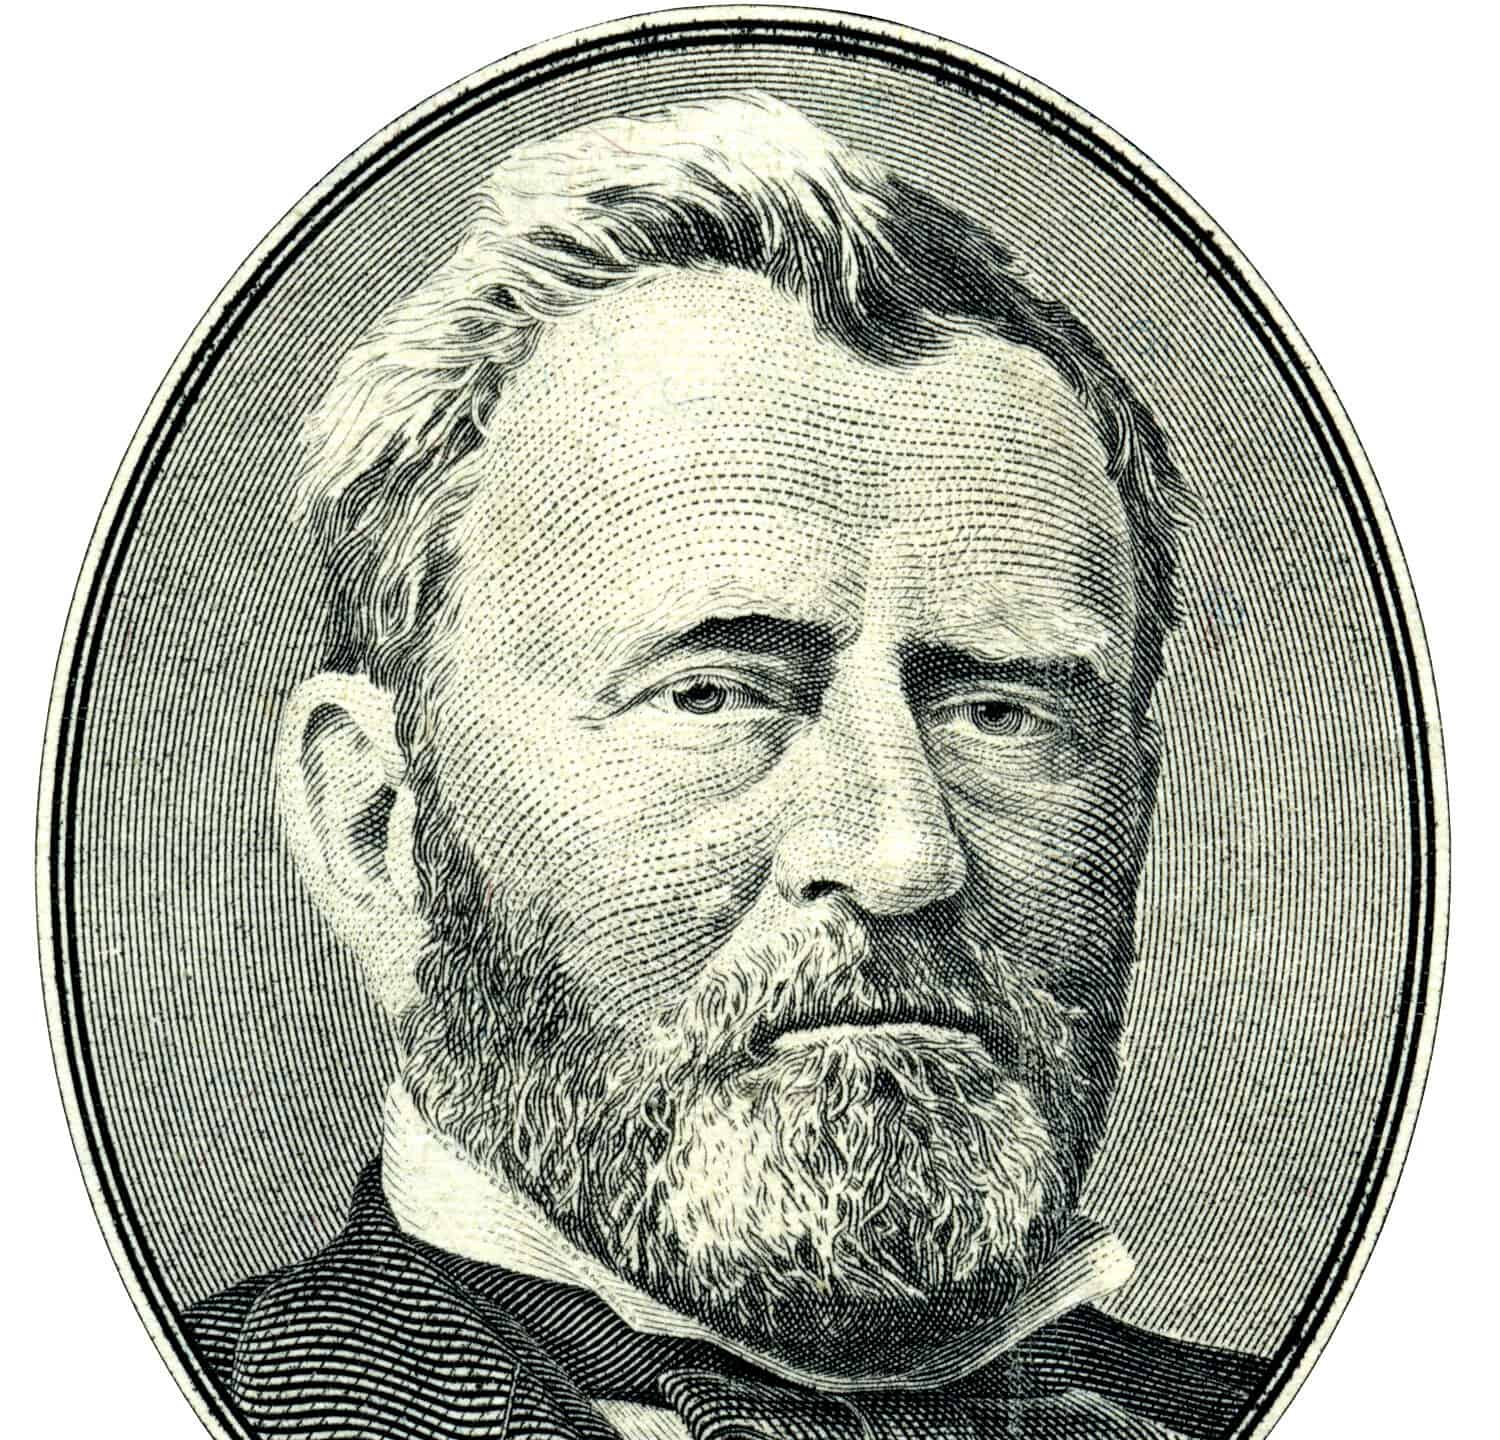 Portrait of U.S. statesman, inventor, and diplomat Ulysses S. Grant as he looks on fifty dollar bill obverse. Clipping path included.